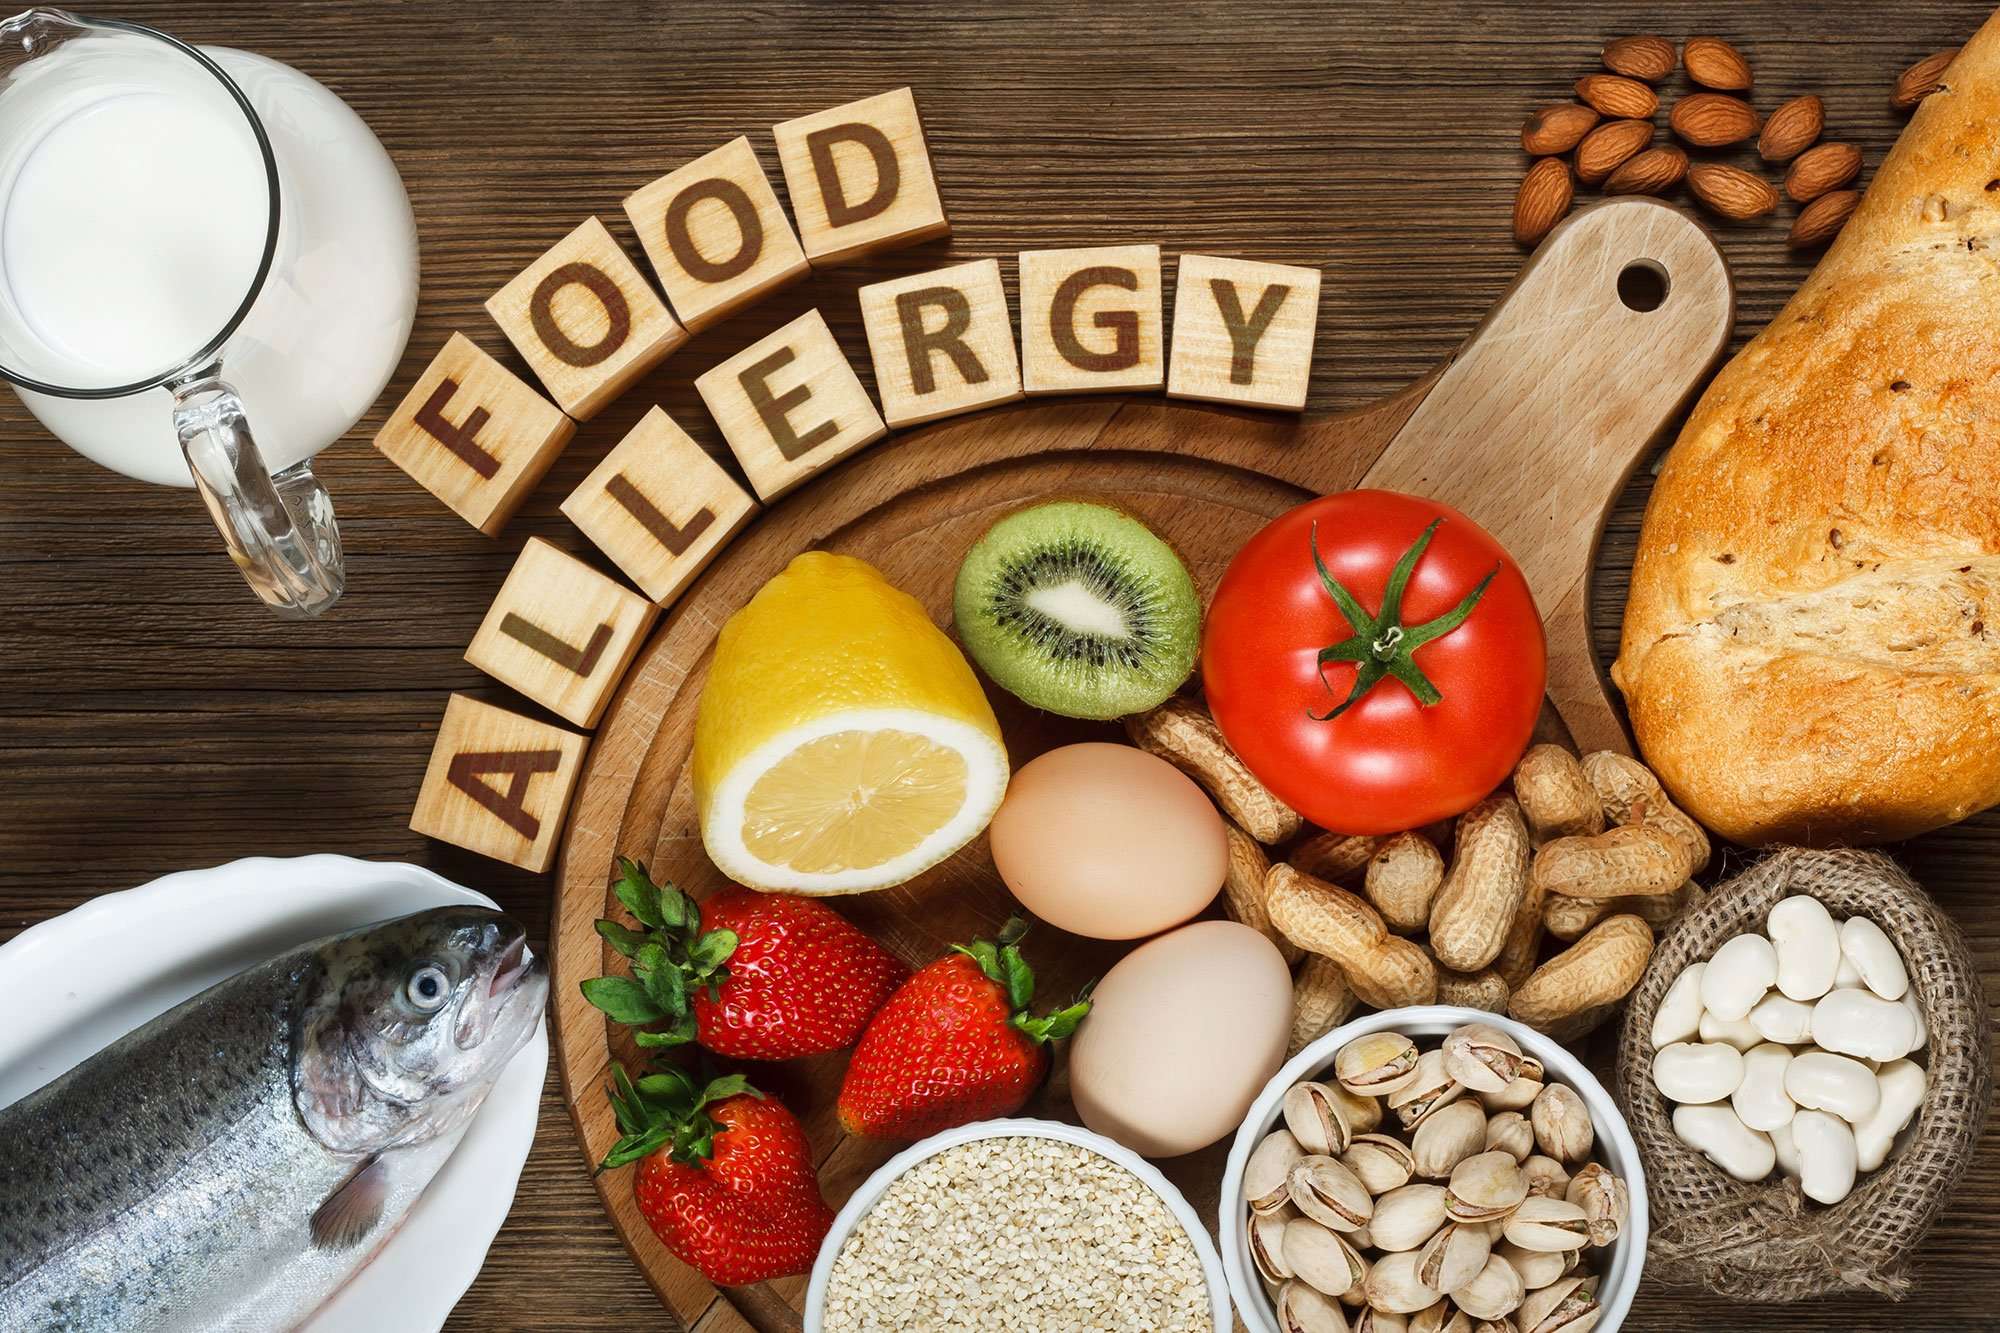 The difference between a food allergy and intolerance